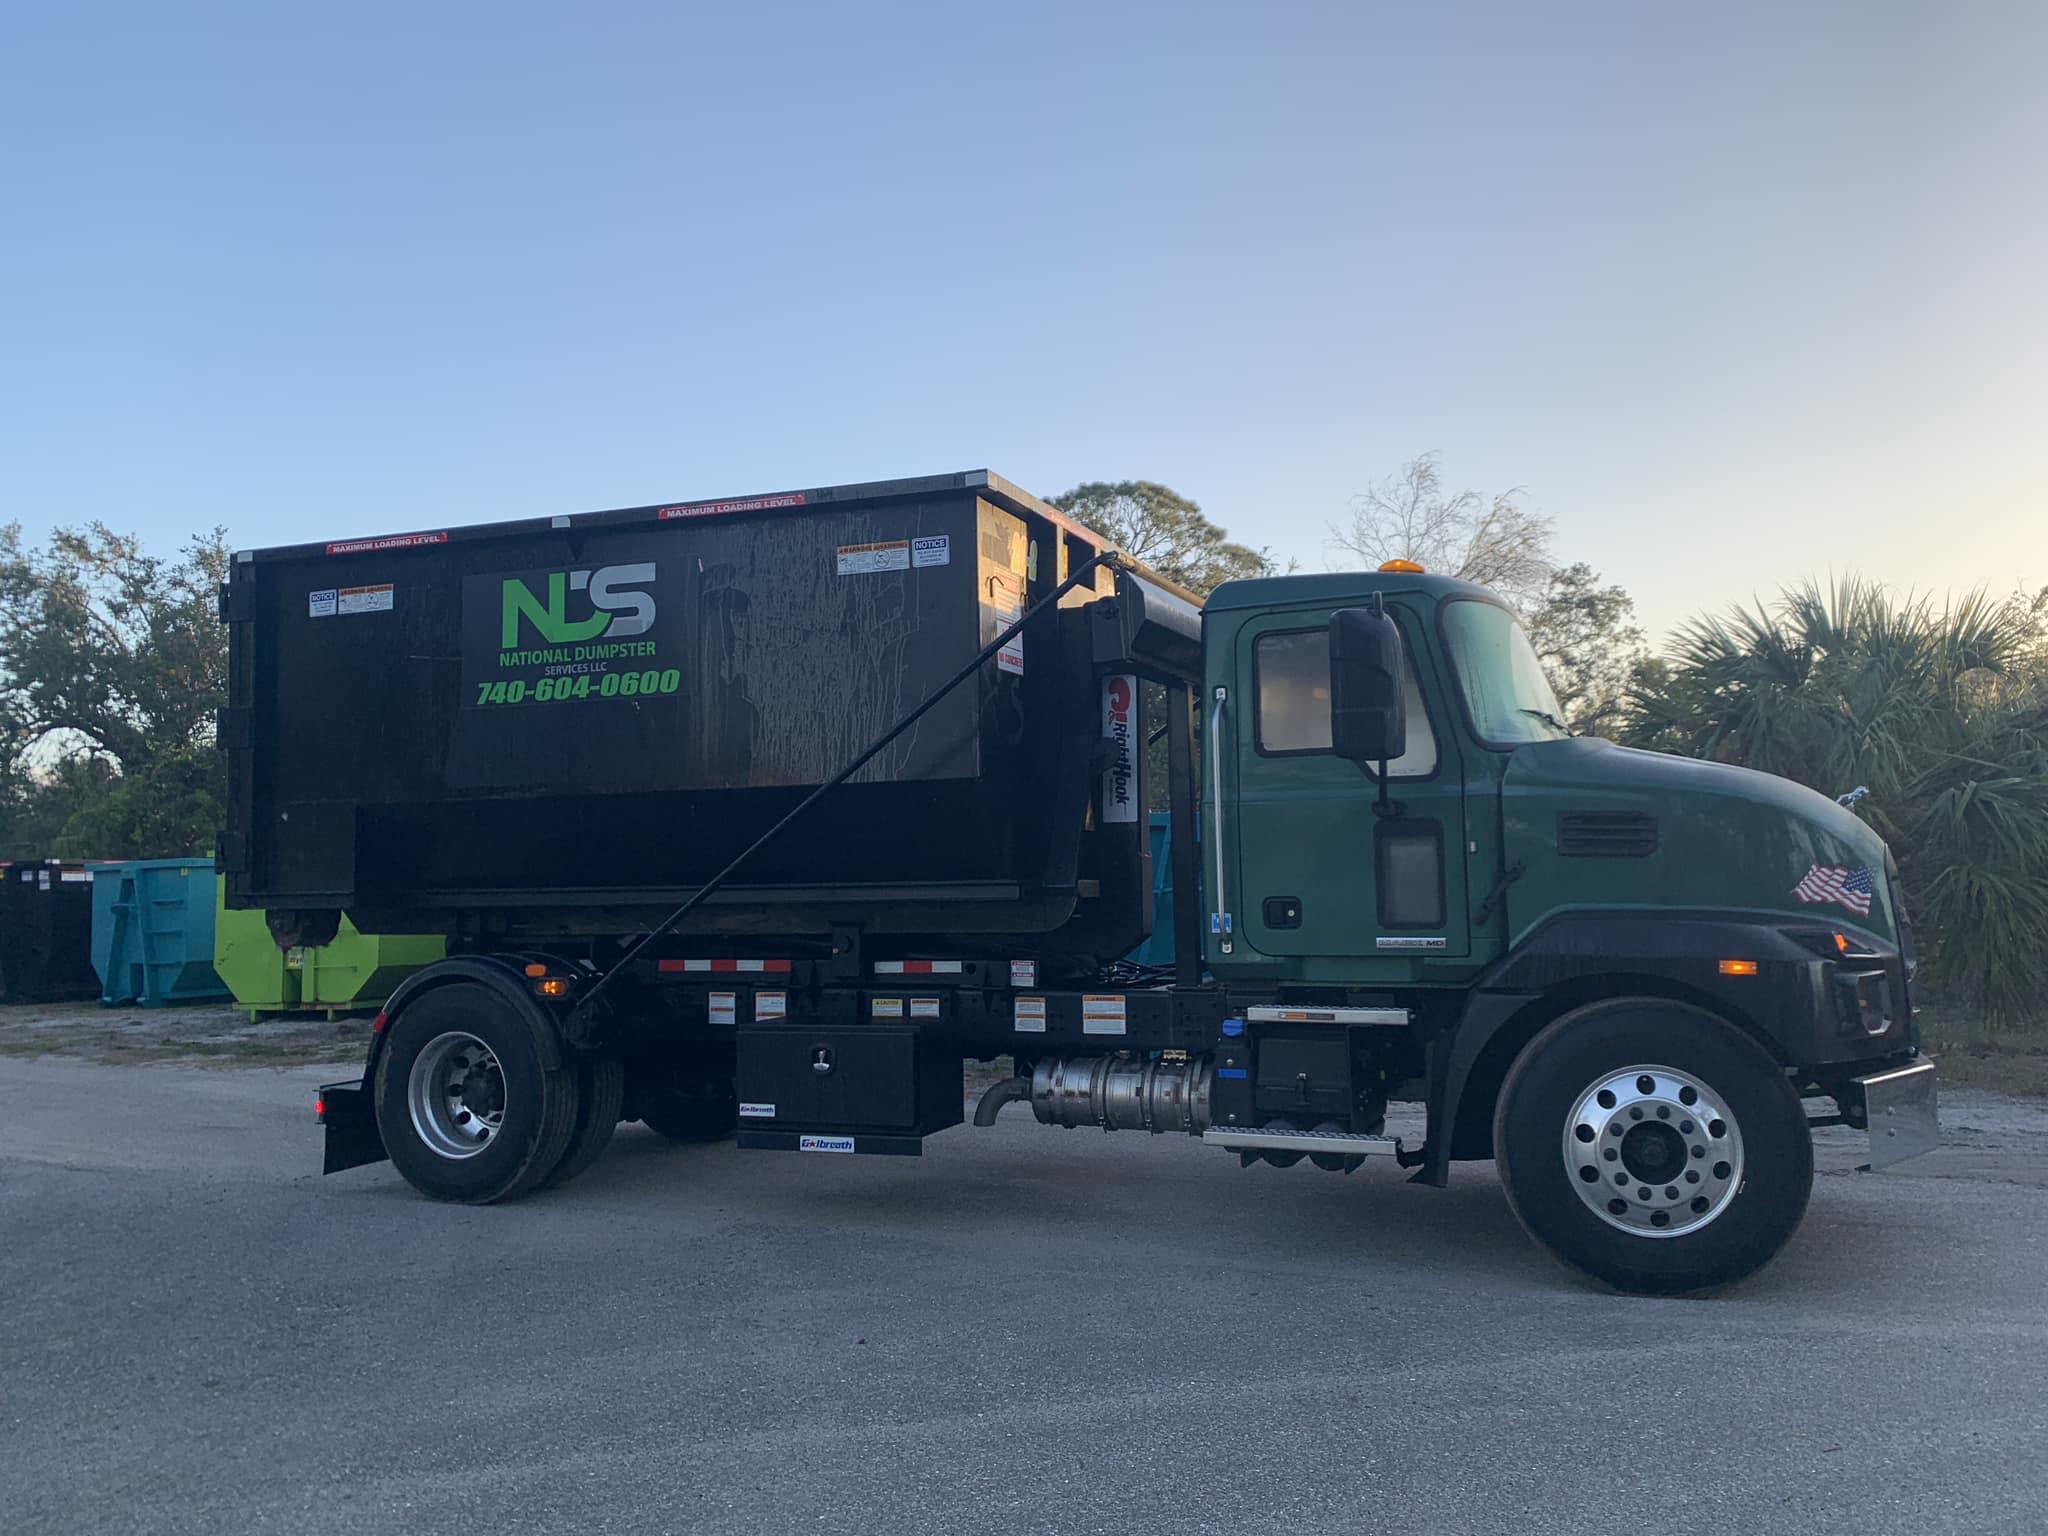 Charlotte Park FL Residential Dumpster Rental for Yard Waste and Outdoor Projects